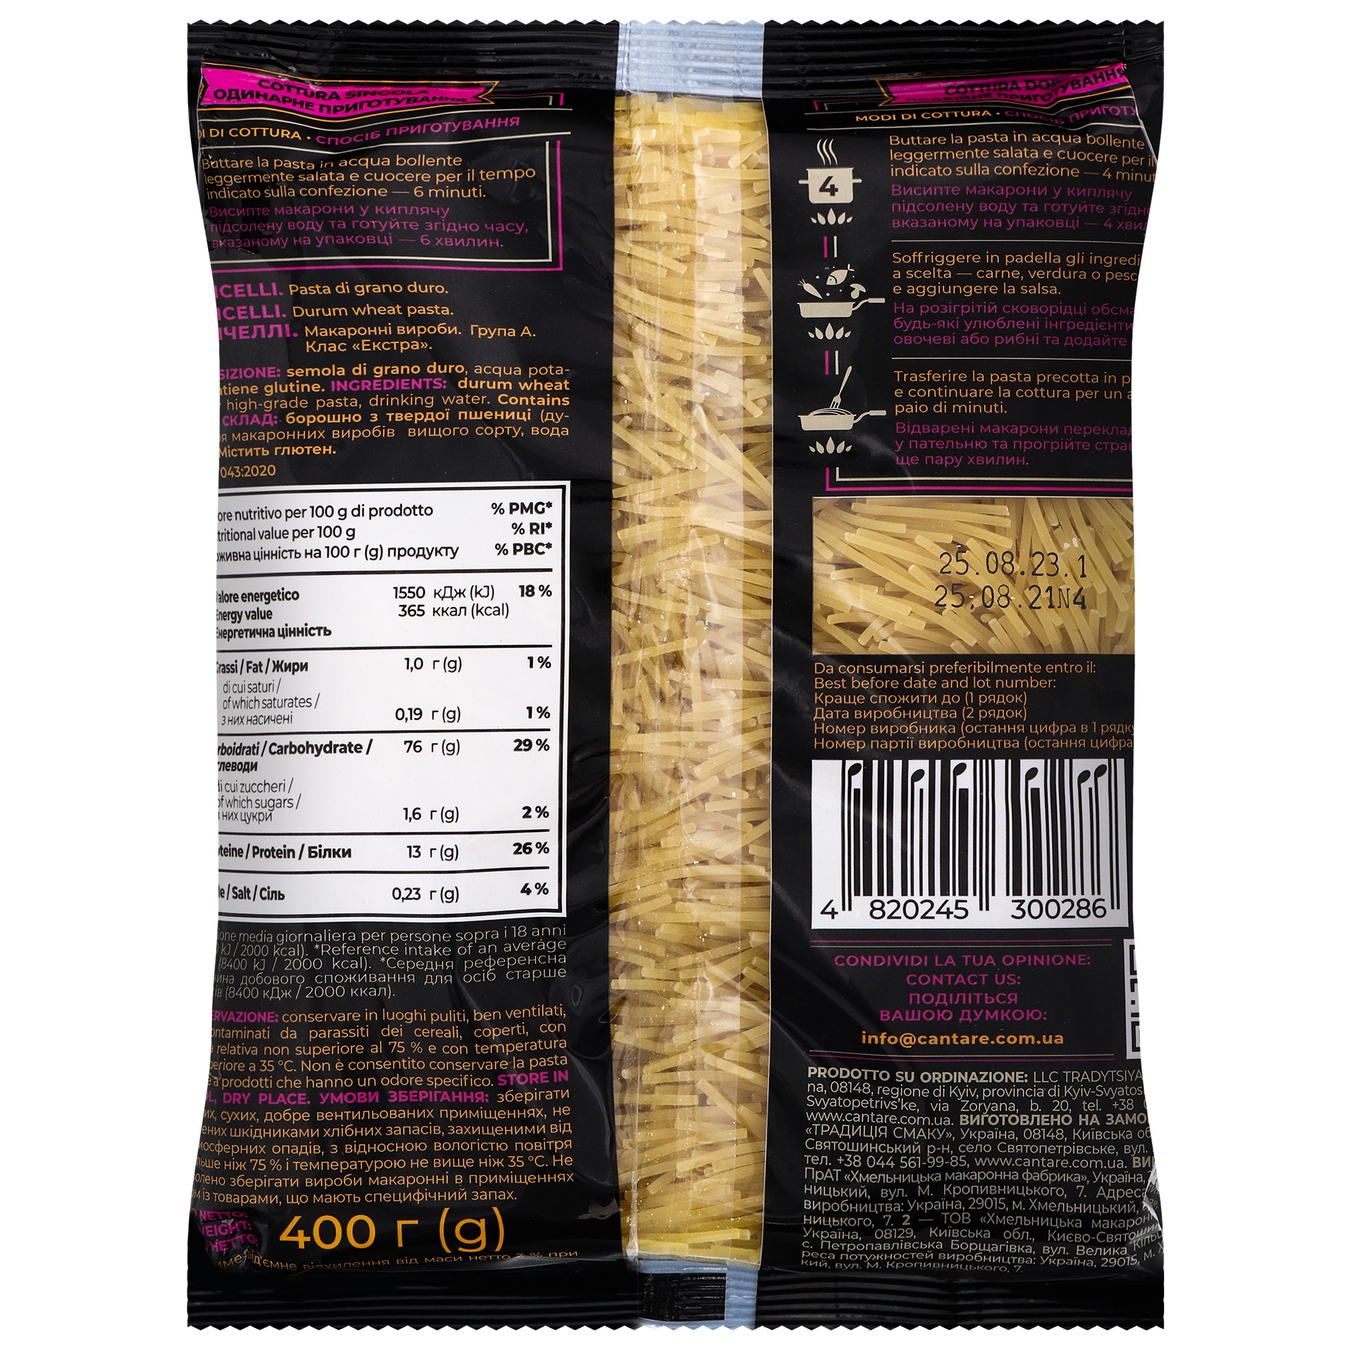 Cantare Vermicelli pasta products 400g 2